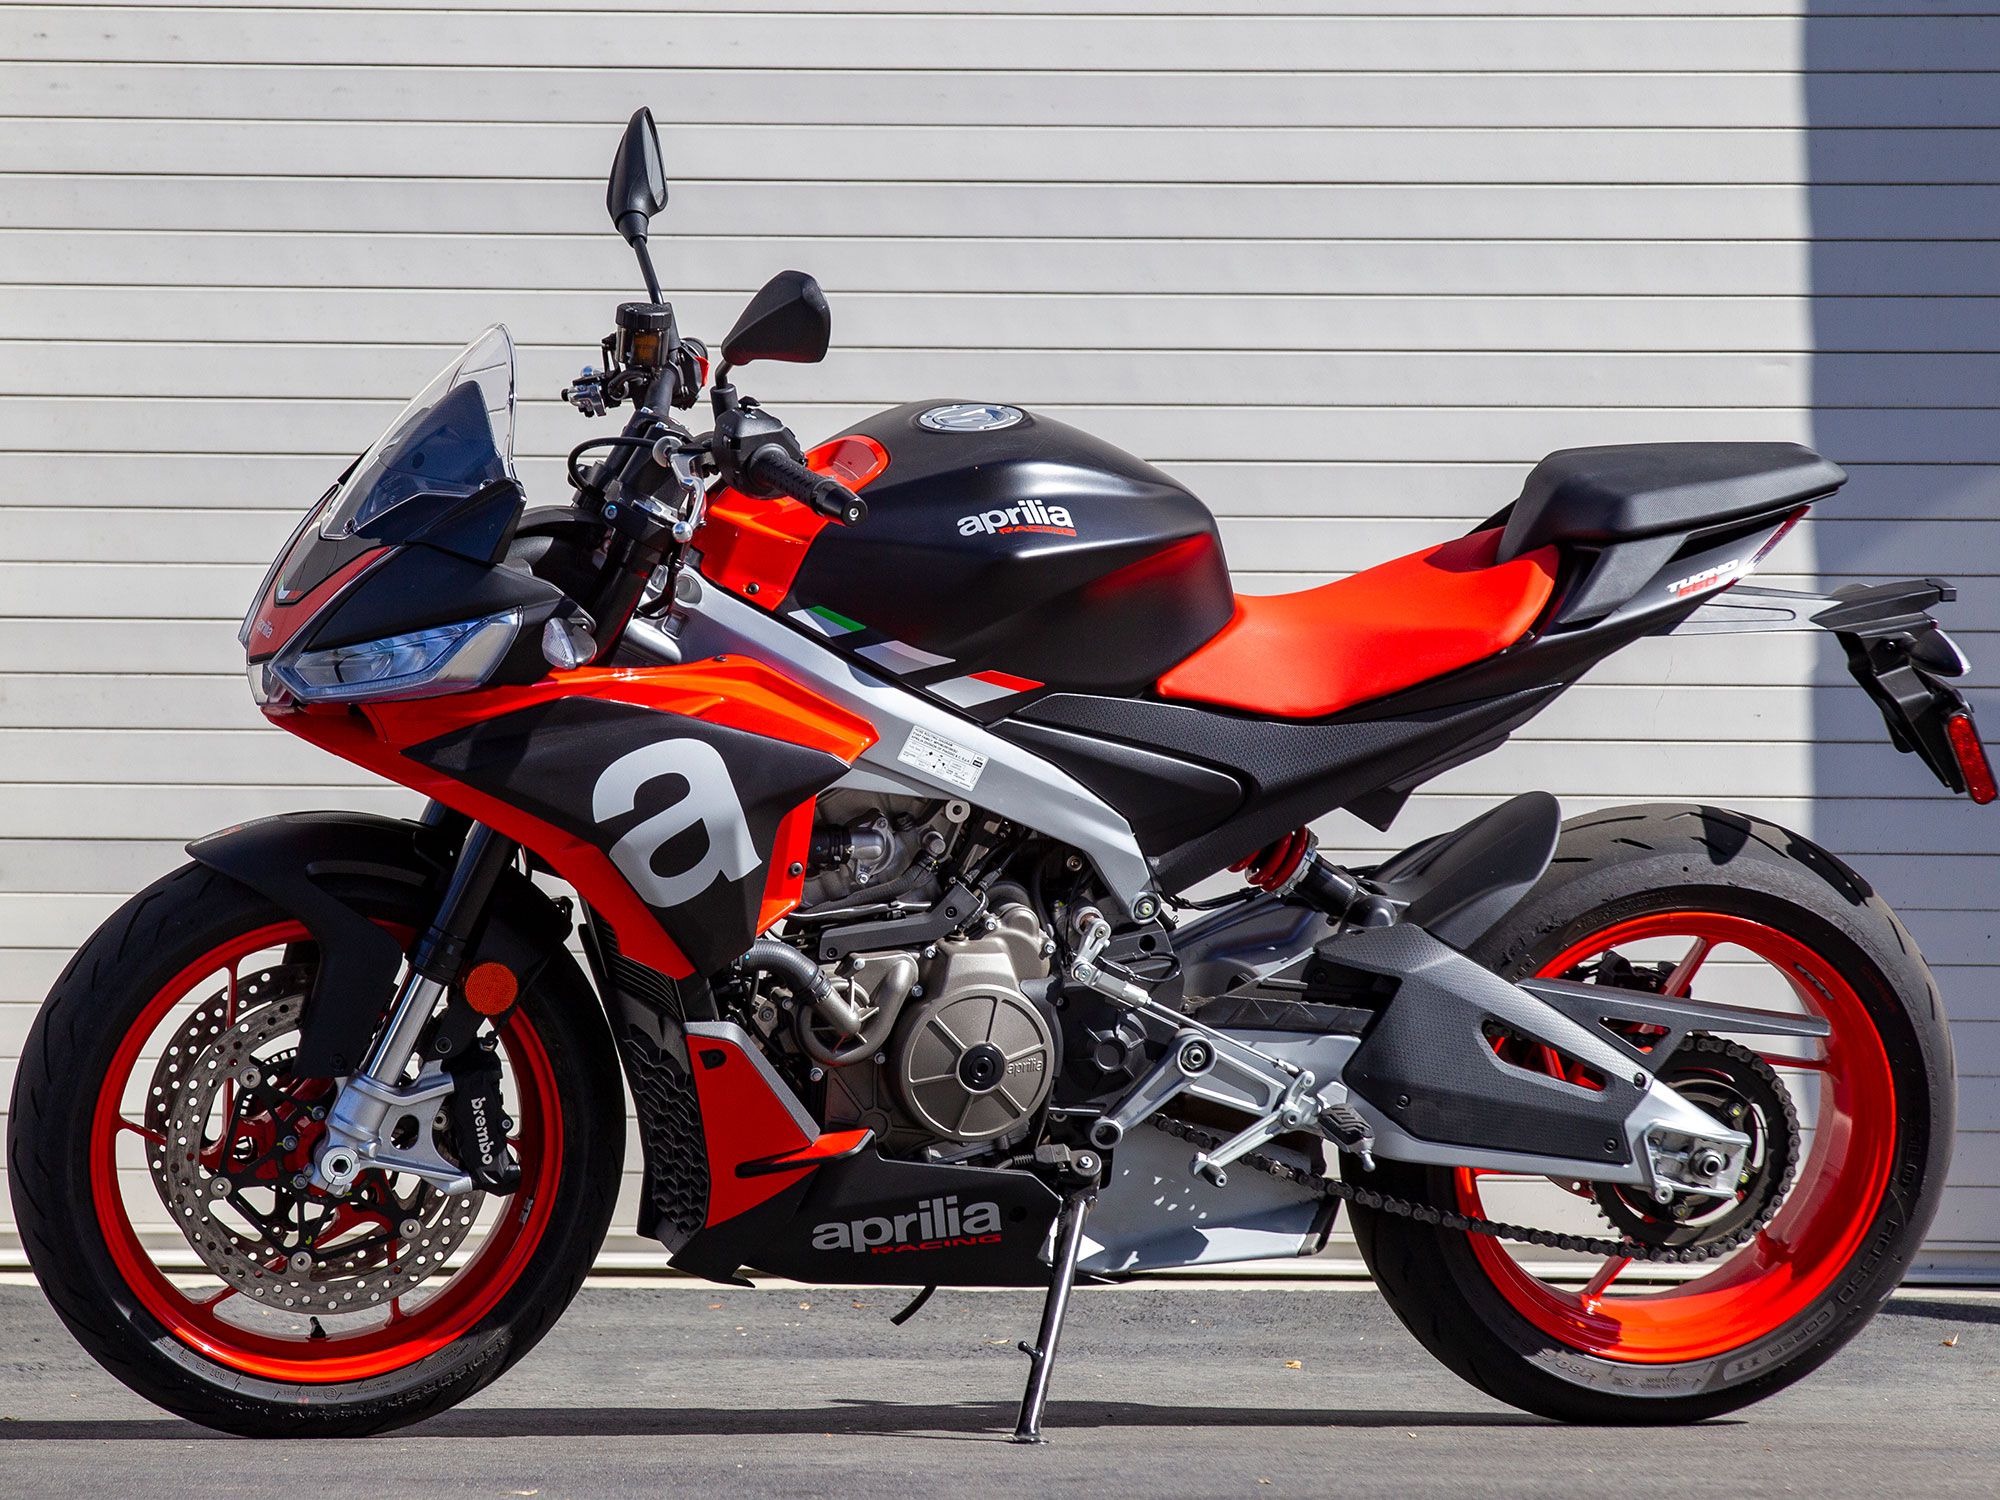 At $10,699 (as tested with the optional quickshifter), the 2021 Aprilia Tuono 660 is a remarkable machine that offers an easier gateway to the Tuono family, in more ways than one.